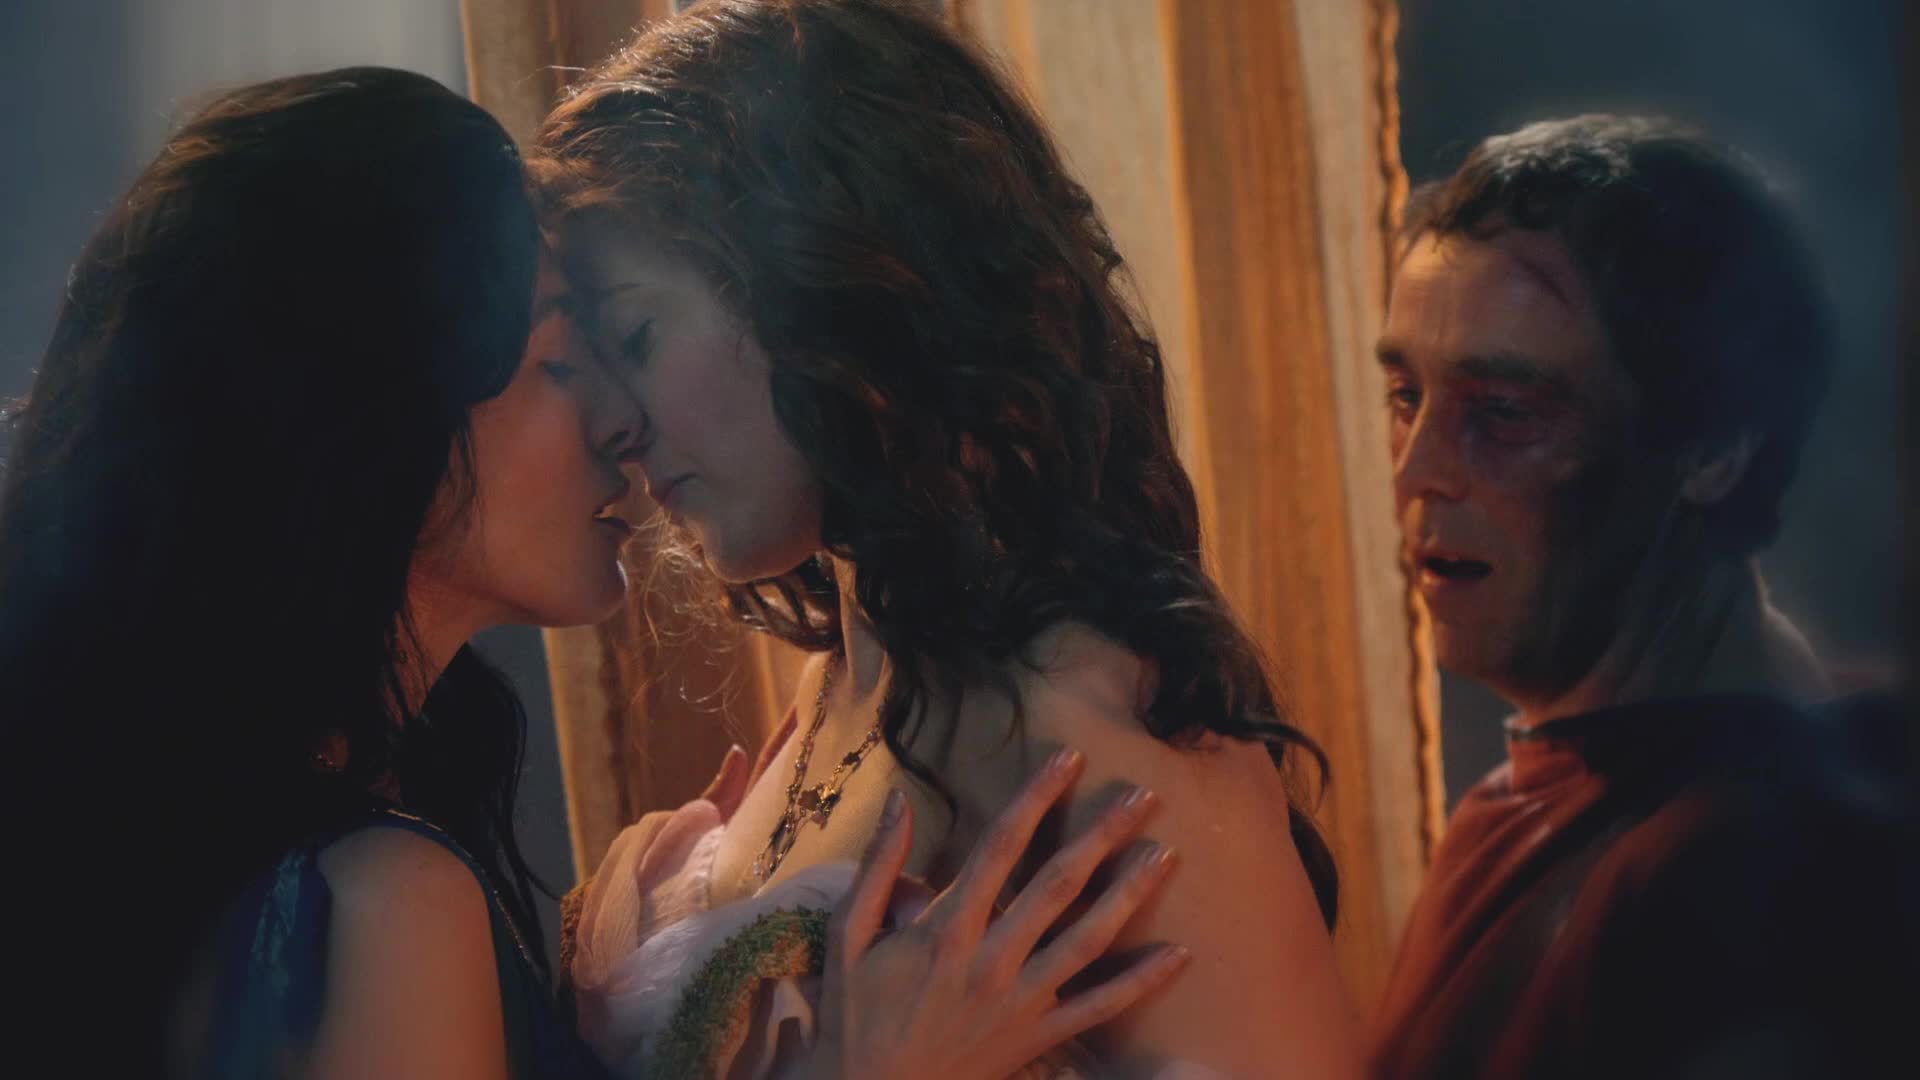 Spartacus Threesome - Lucy Lawless and Jaime Murray 3 way in Spartacus | Sniz Porn